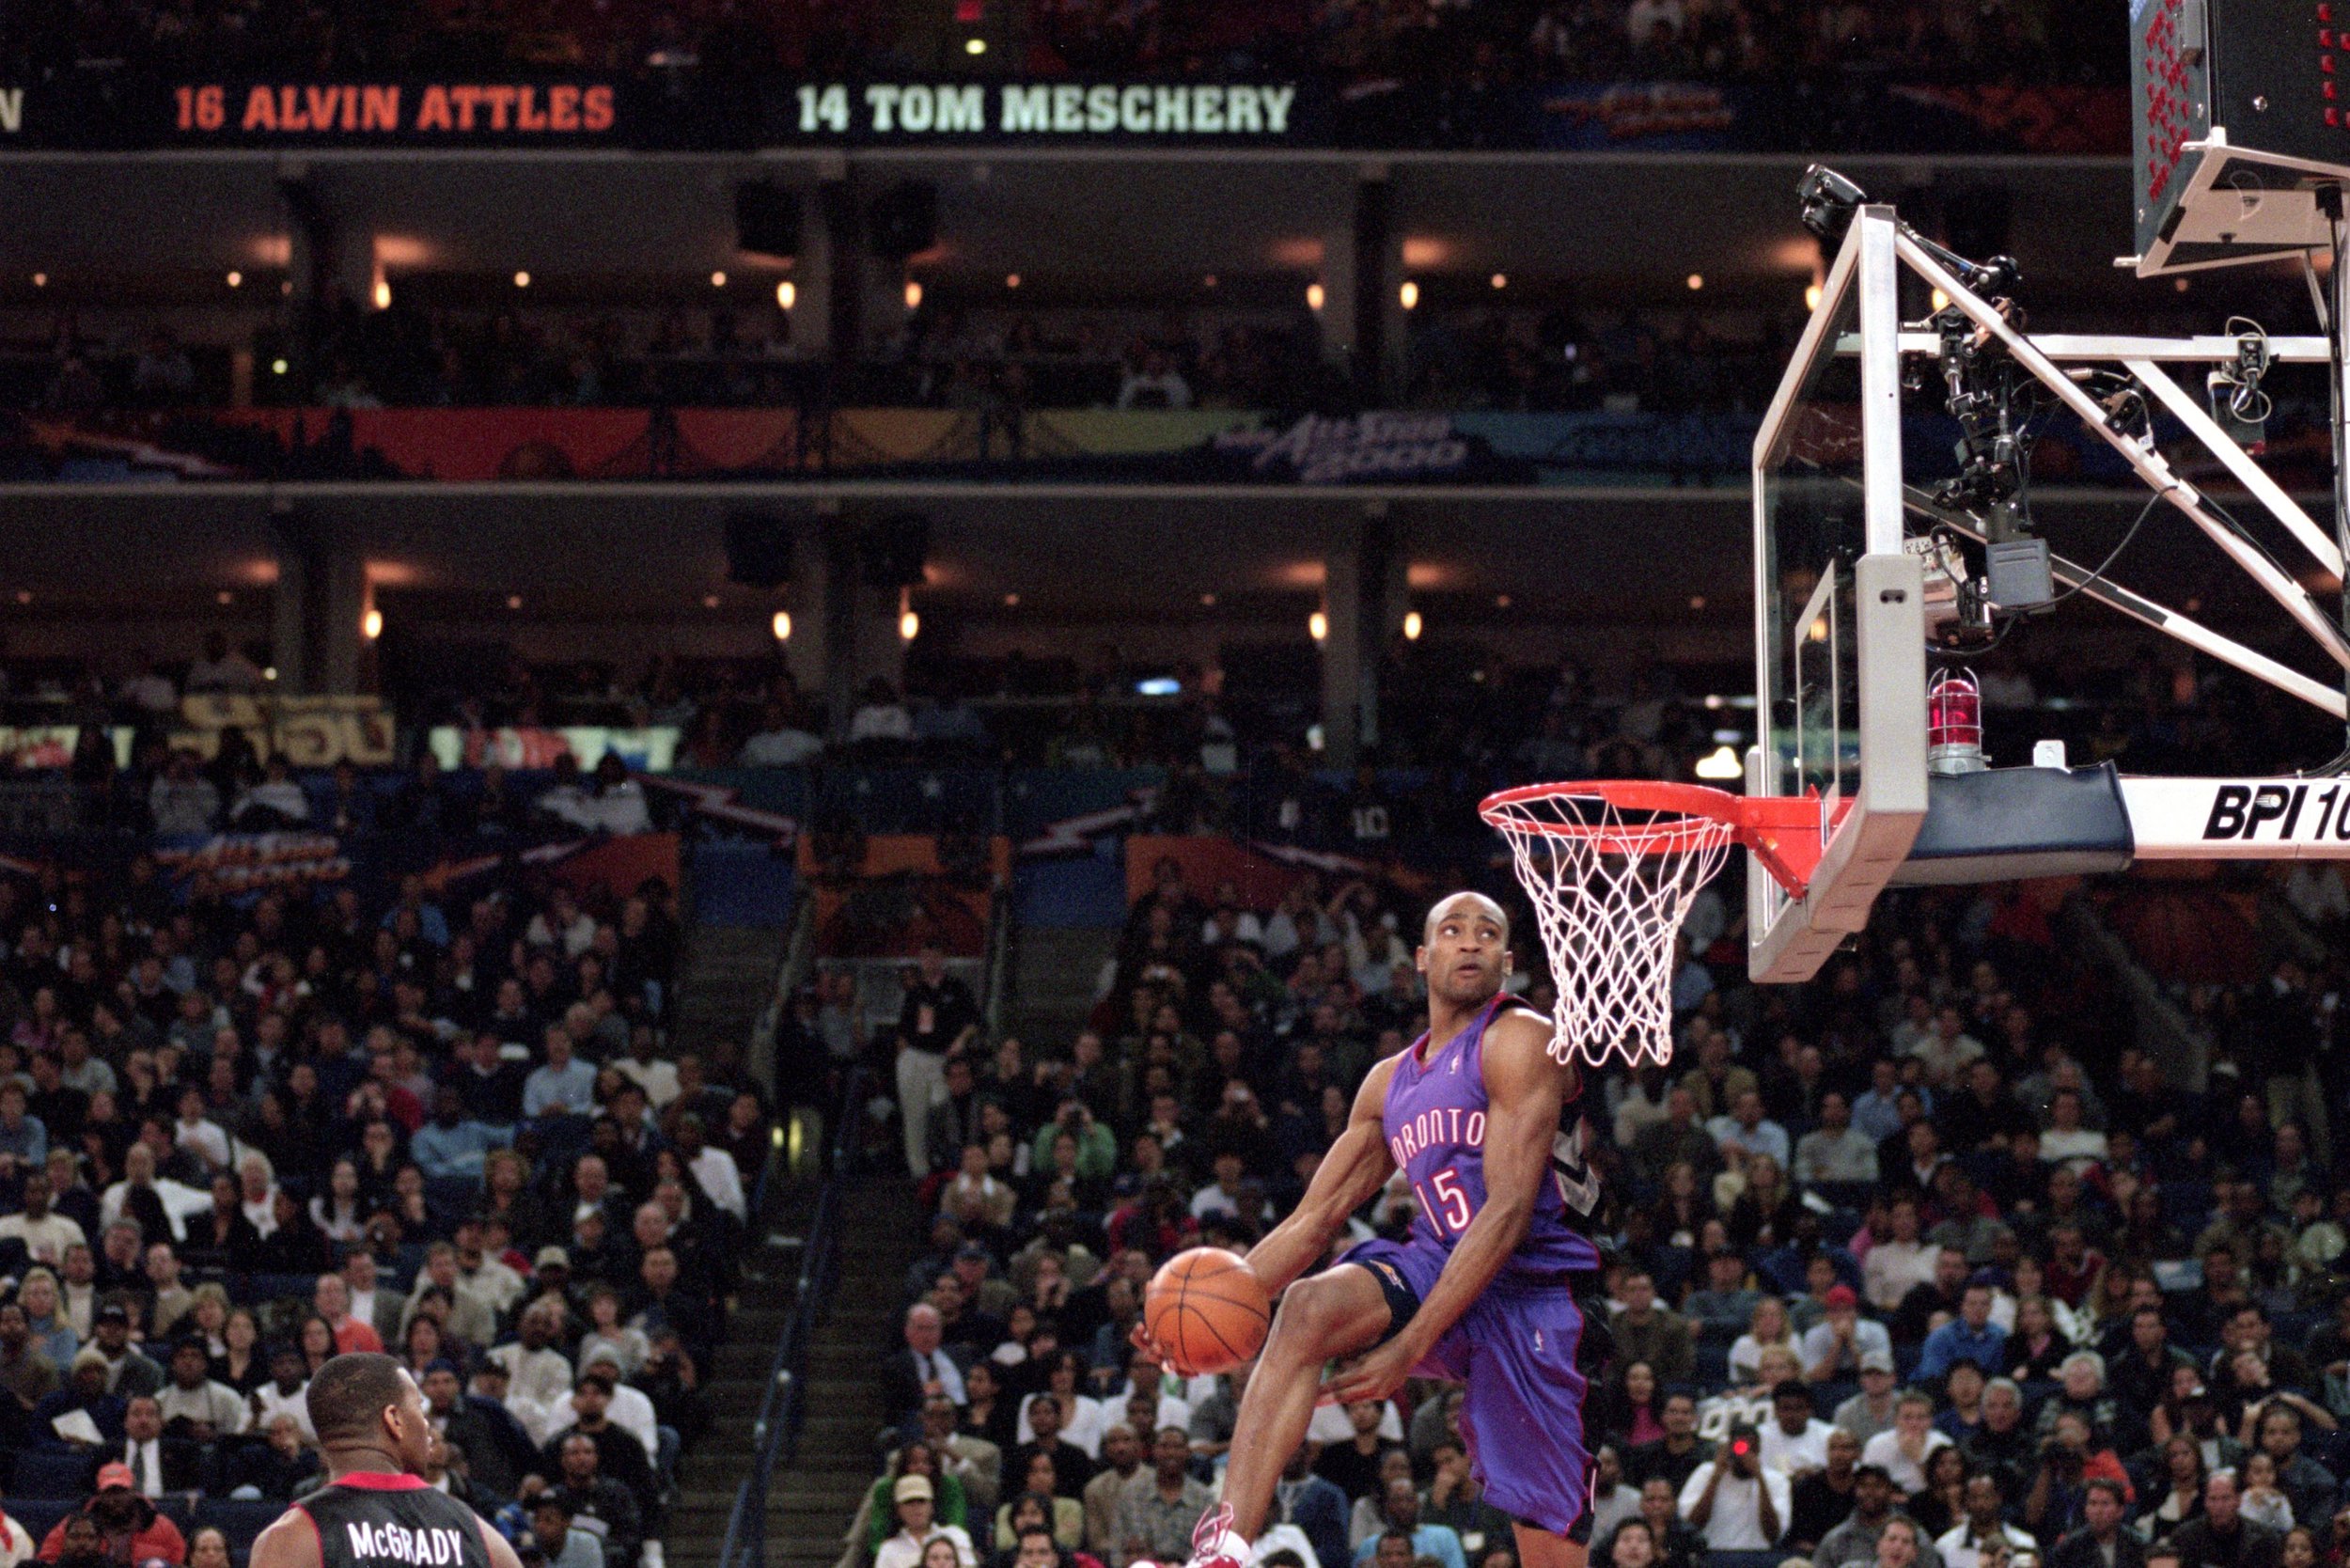 Vince Carter's best slam dunks apparently took place in practice.